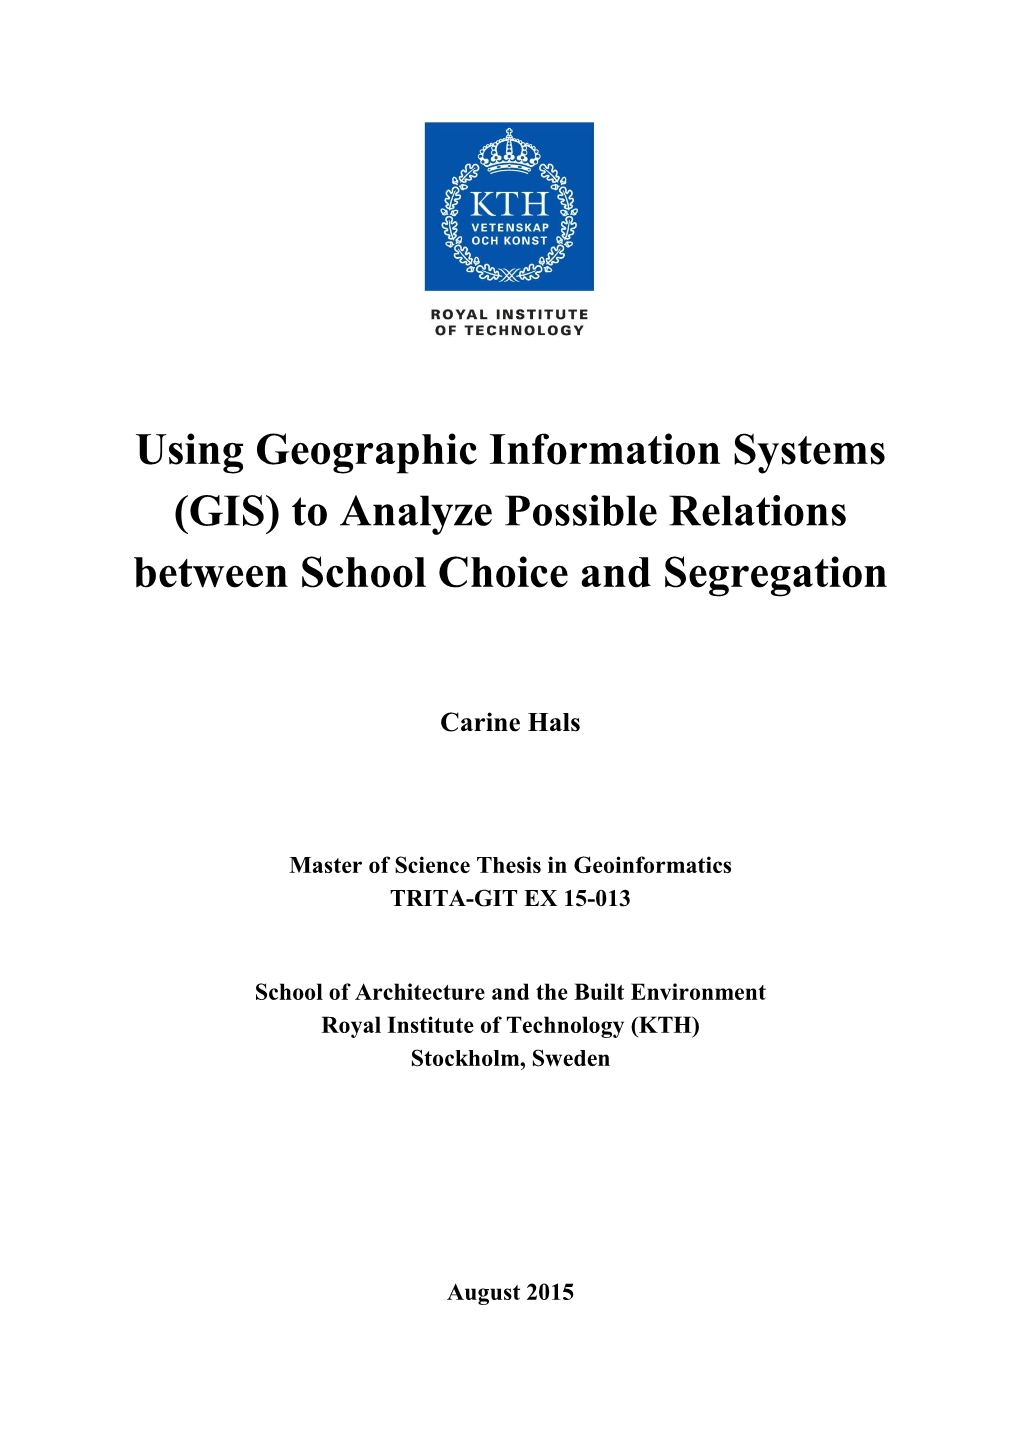 Using Geographic Information Systems (GIS) to Analyze Possible Relations Between School Choice and Segregation